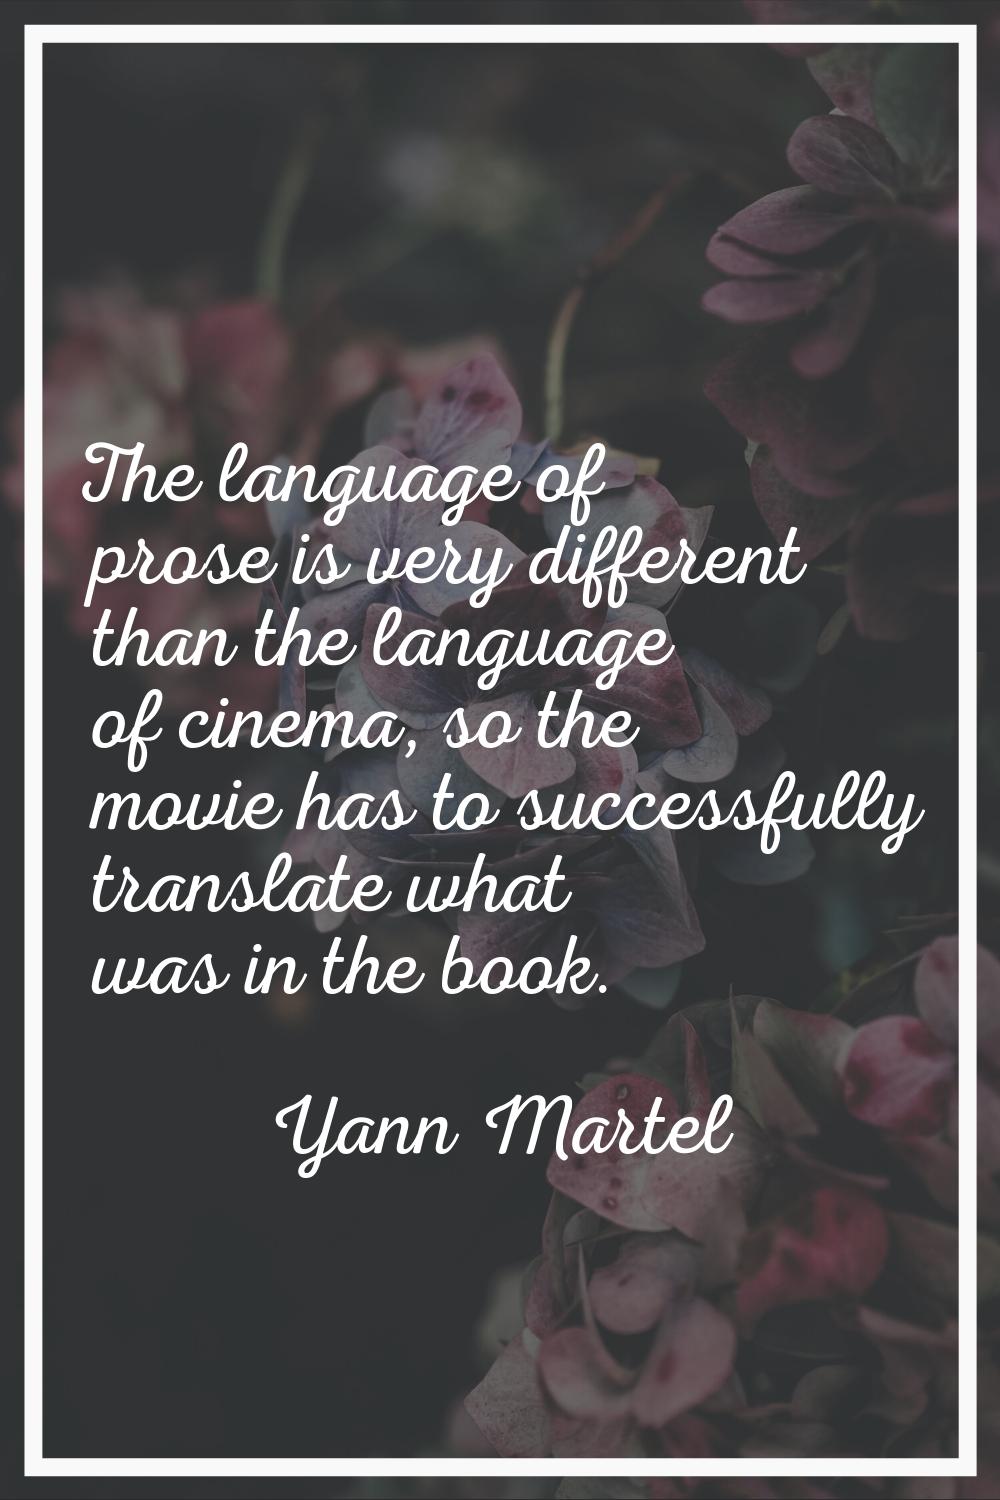 The language of prose is very different than the language of cinema, so the movie has to successful